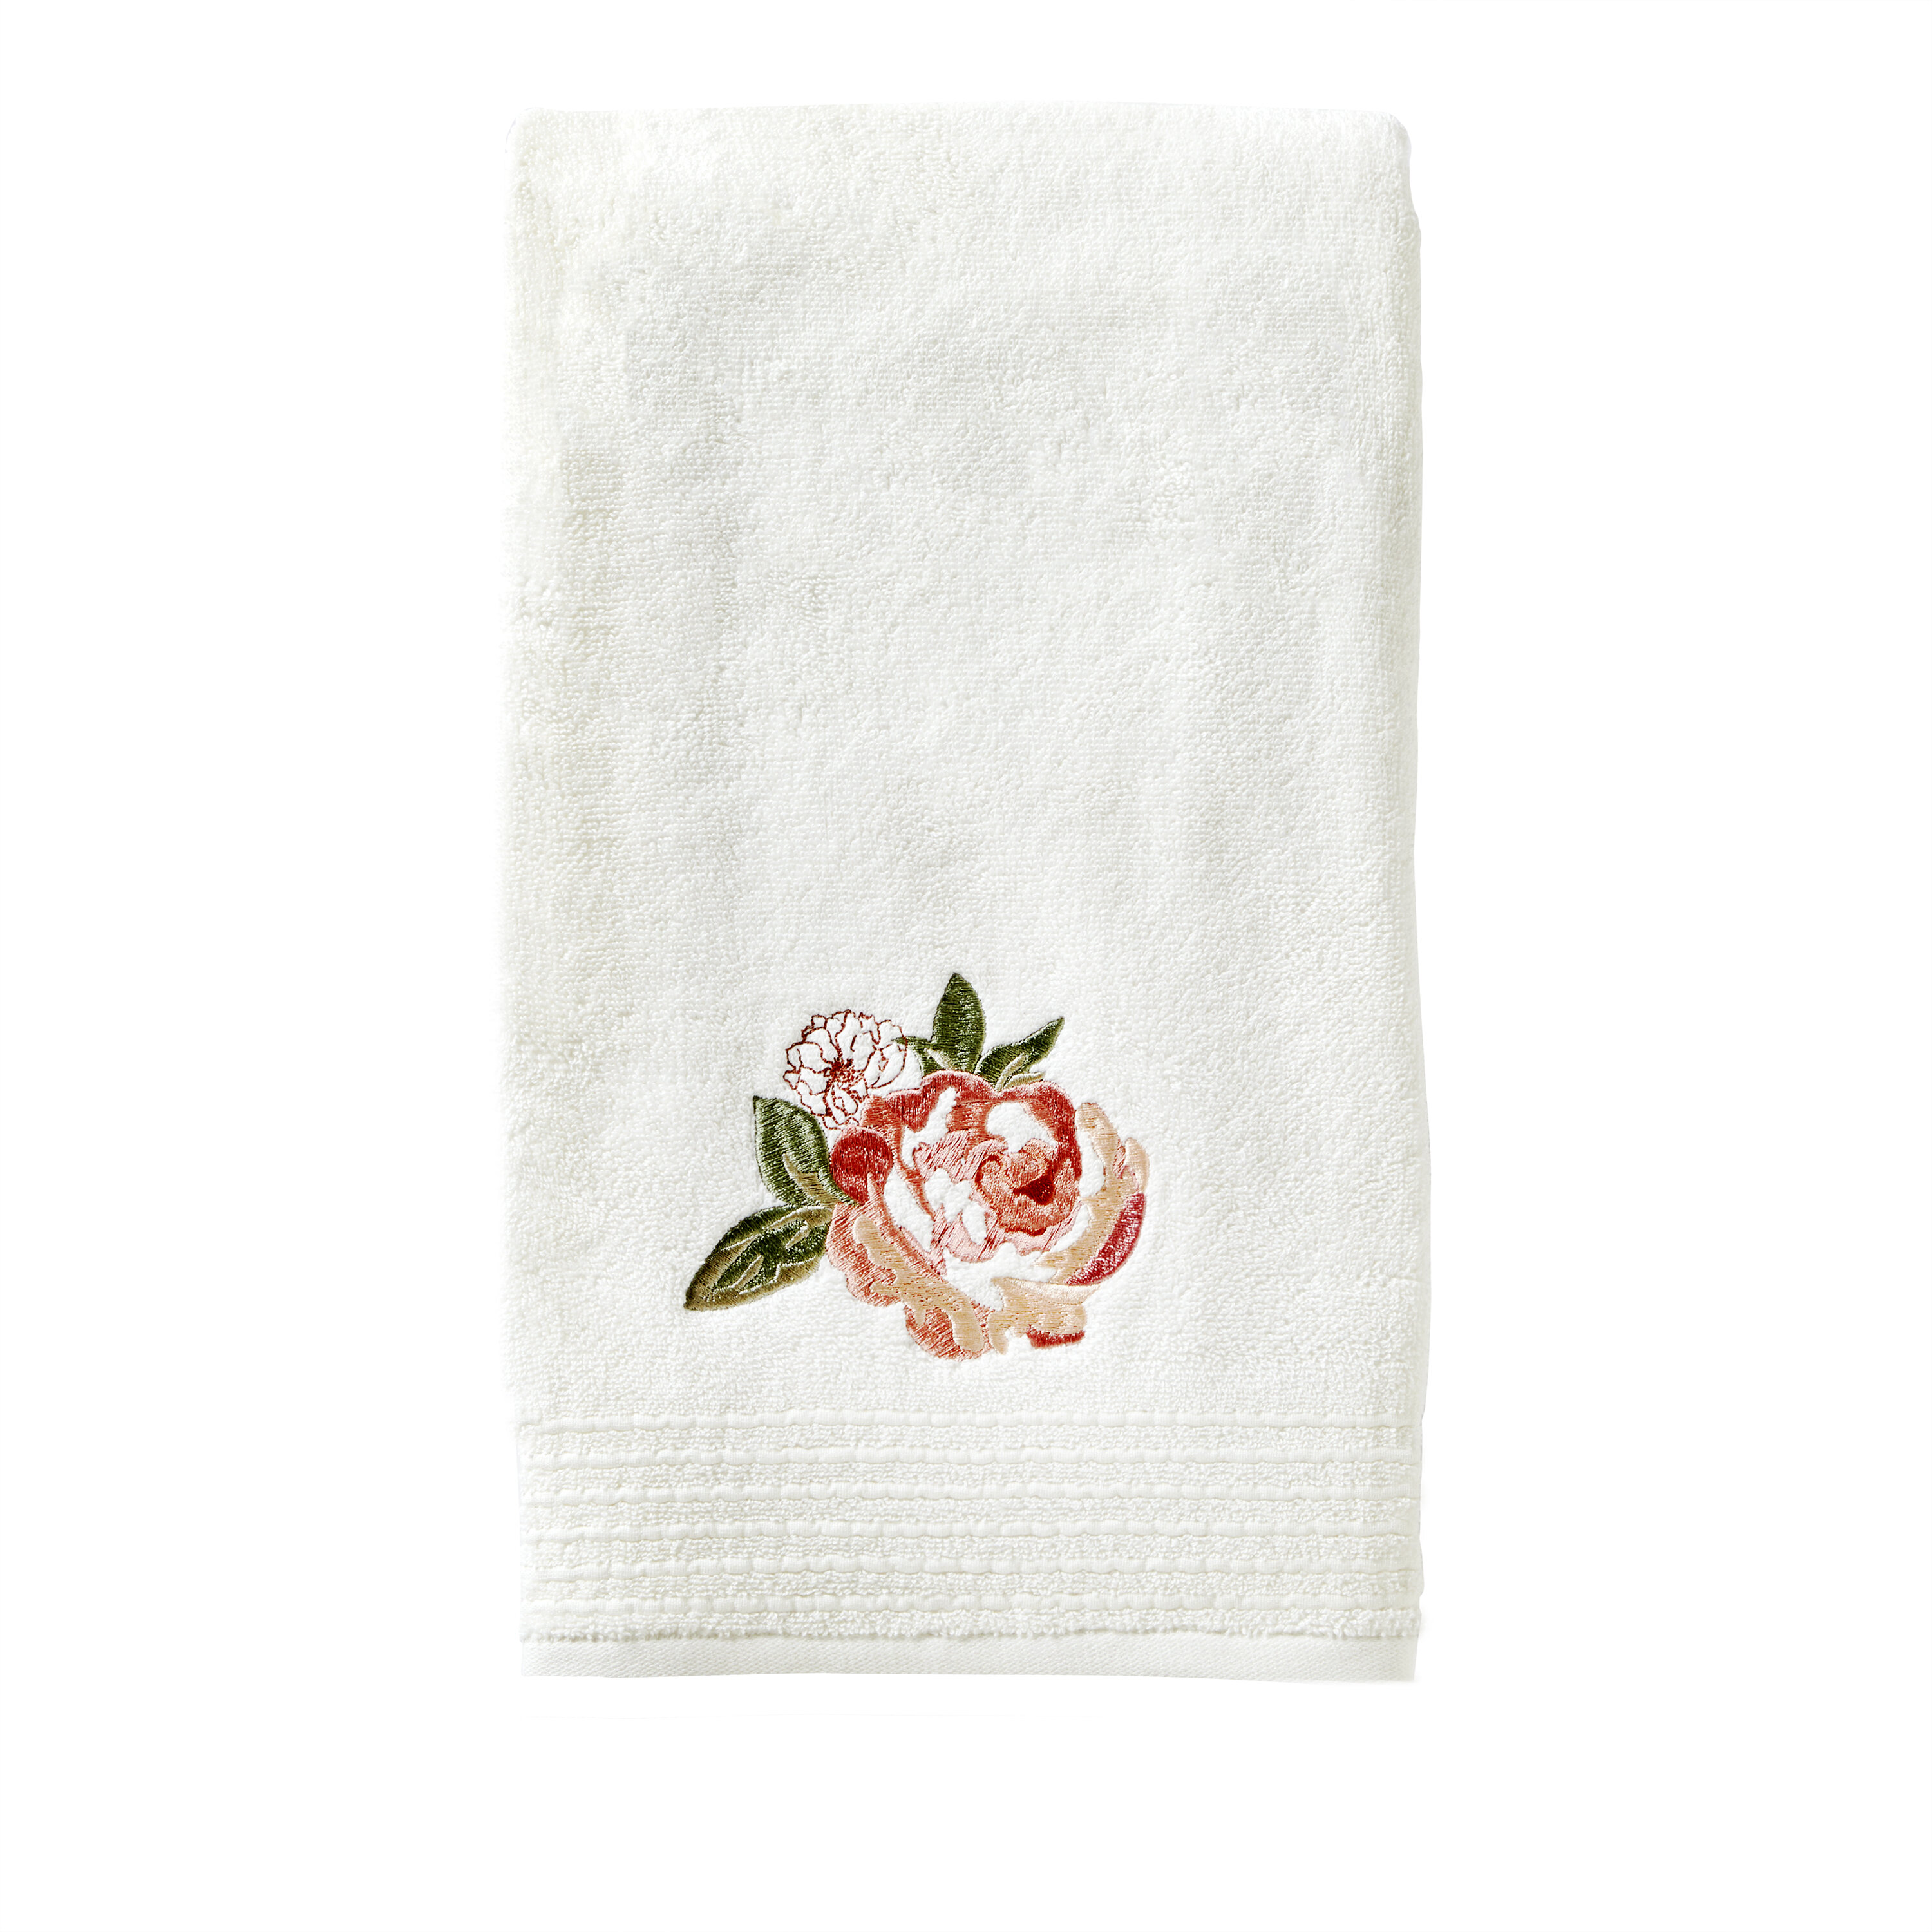 Grey Pleated Trim Cotton Hand Towel Sold by at Home